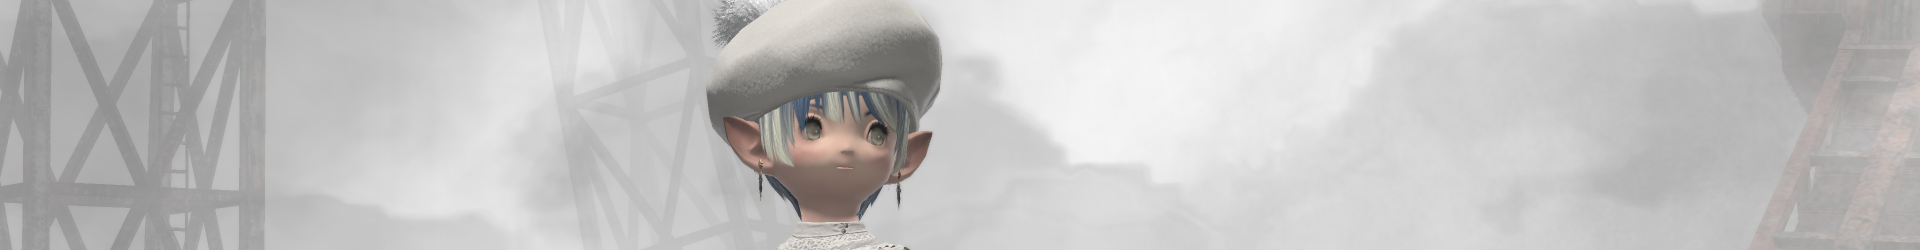 cropped-ffxiv_20200627_222753_538.png